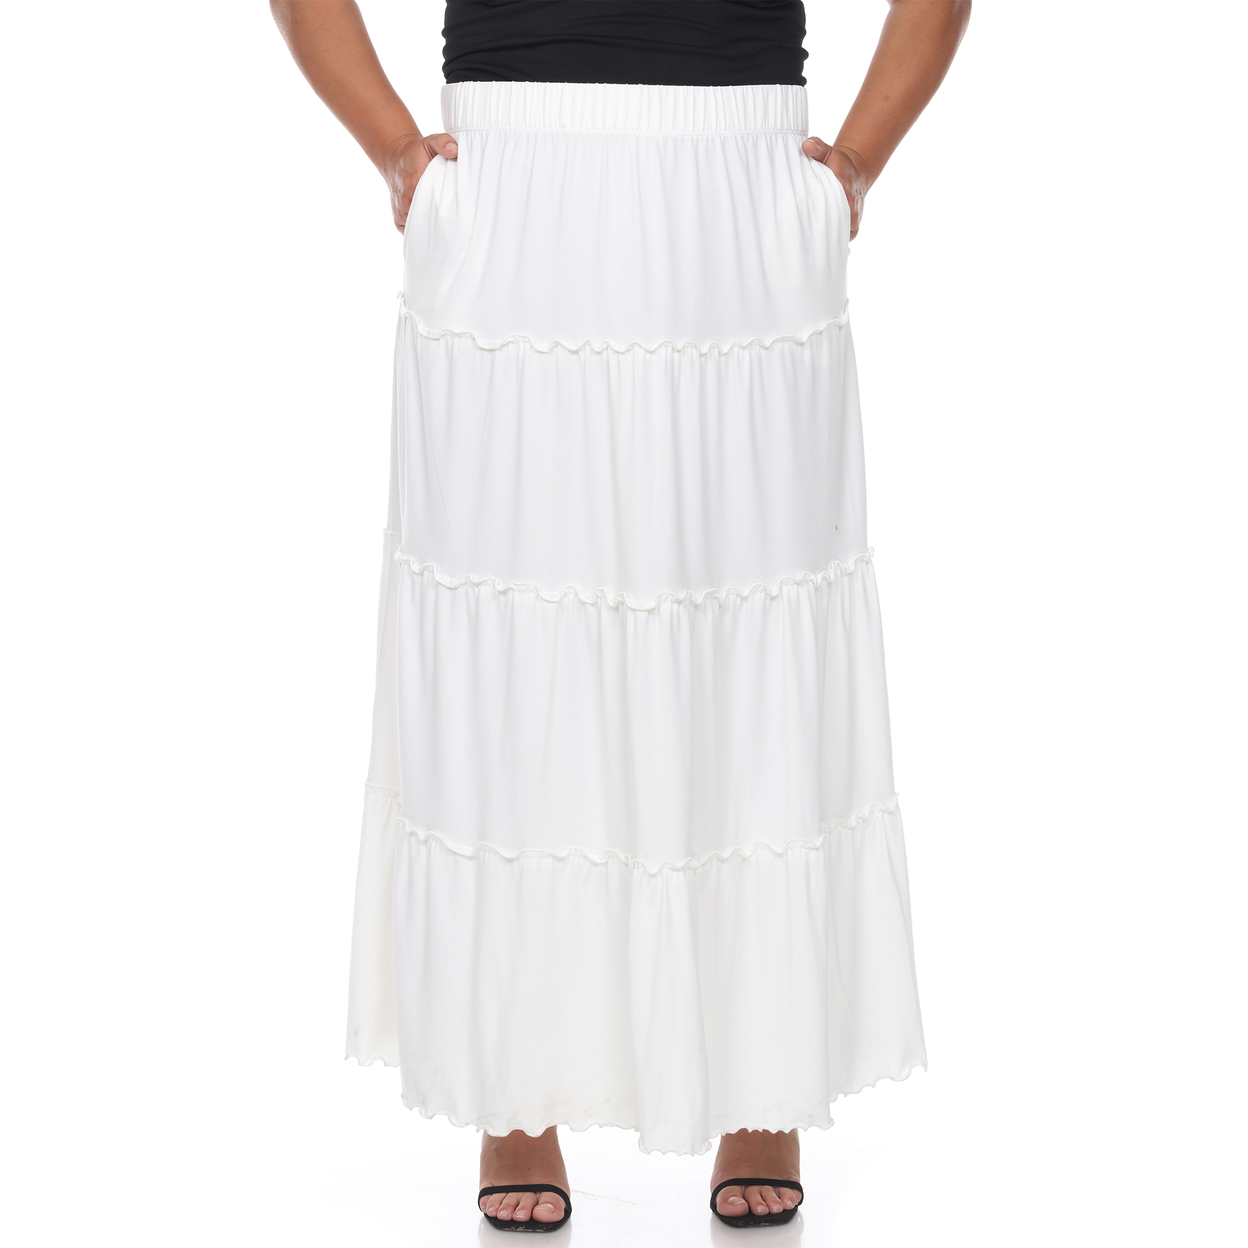 White Mark Women's Plus Size Tiered Maxi Skirt With Pockets - Navy, 3x